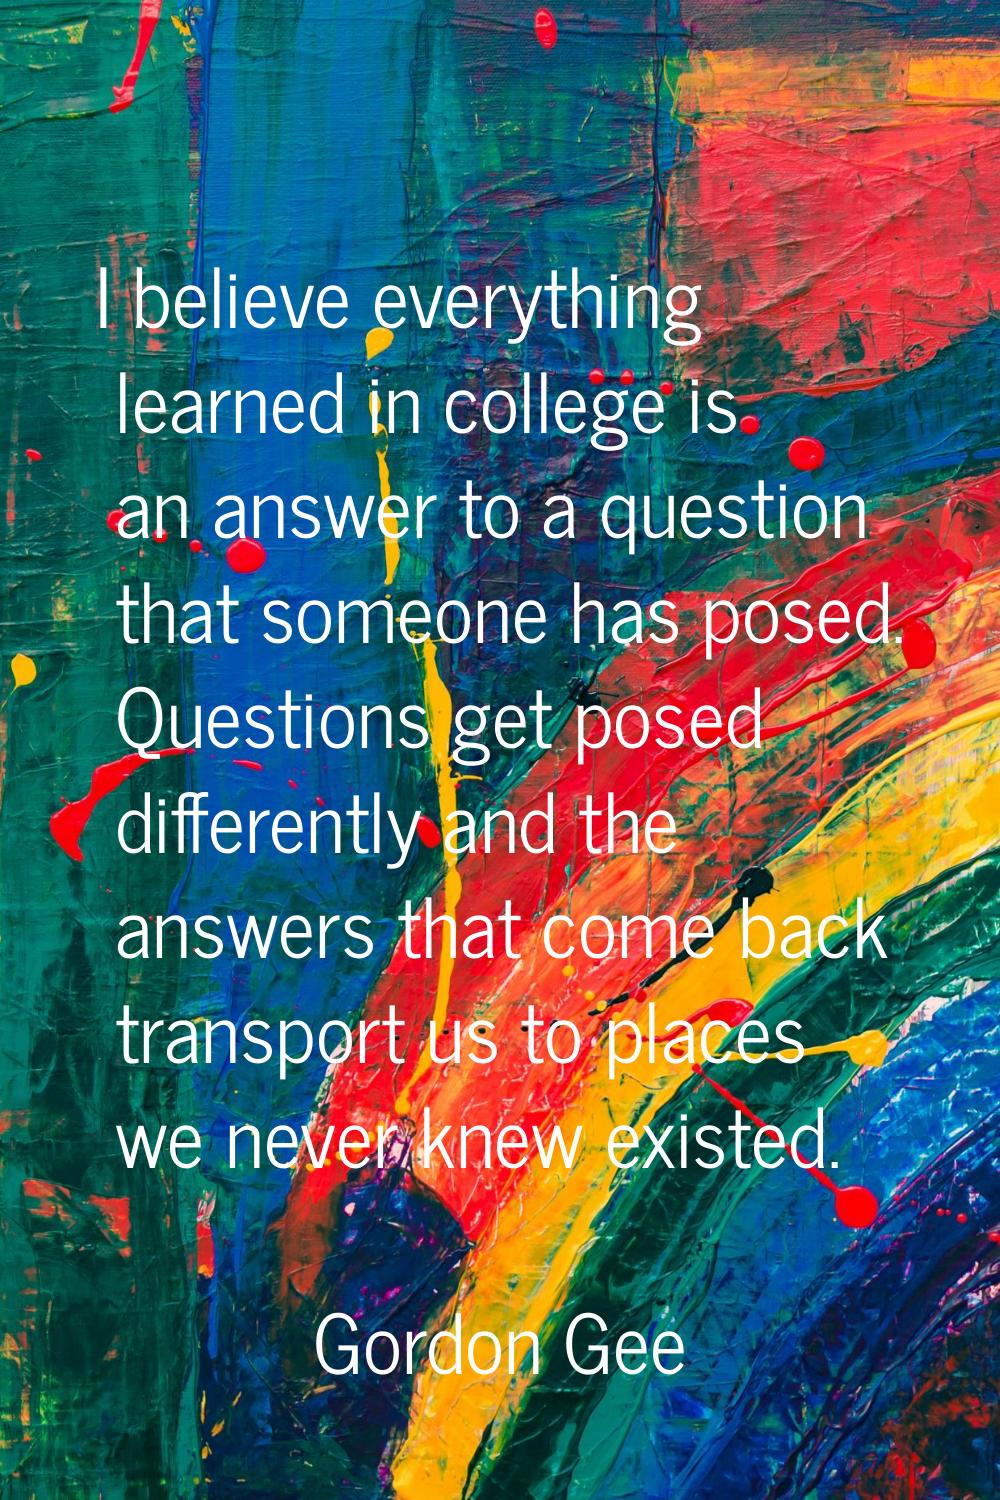 I believe everything learned in college is an answer to a question that someone has posed. Question